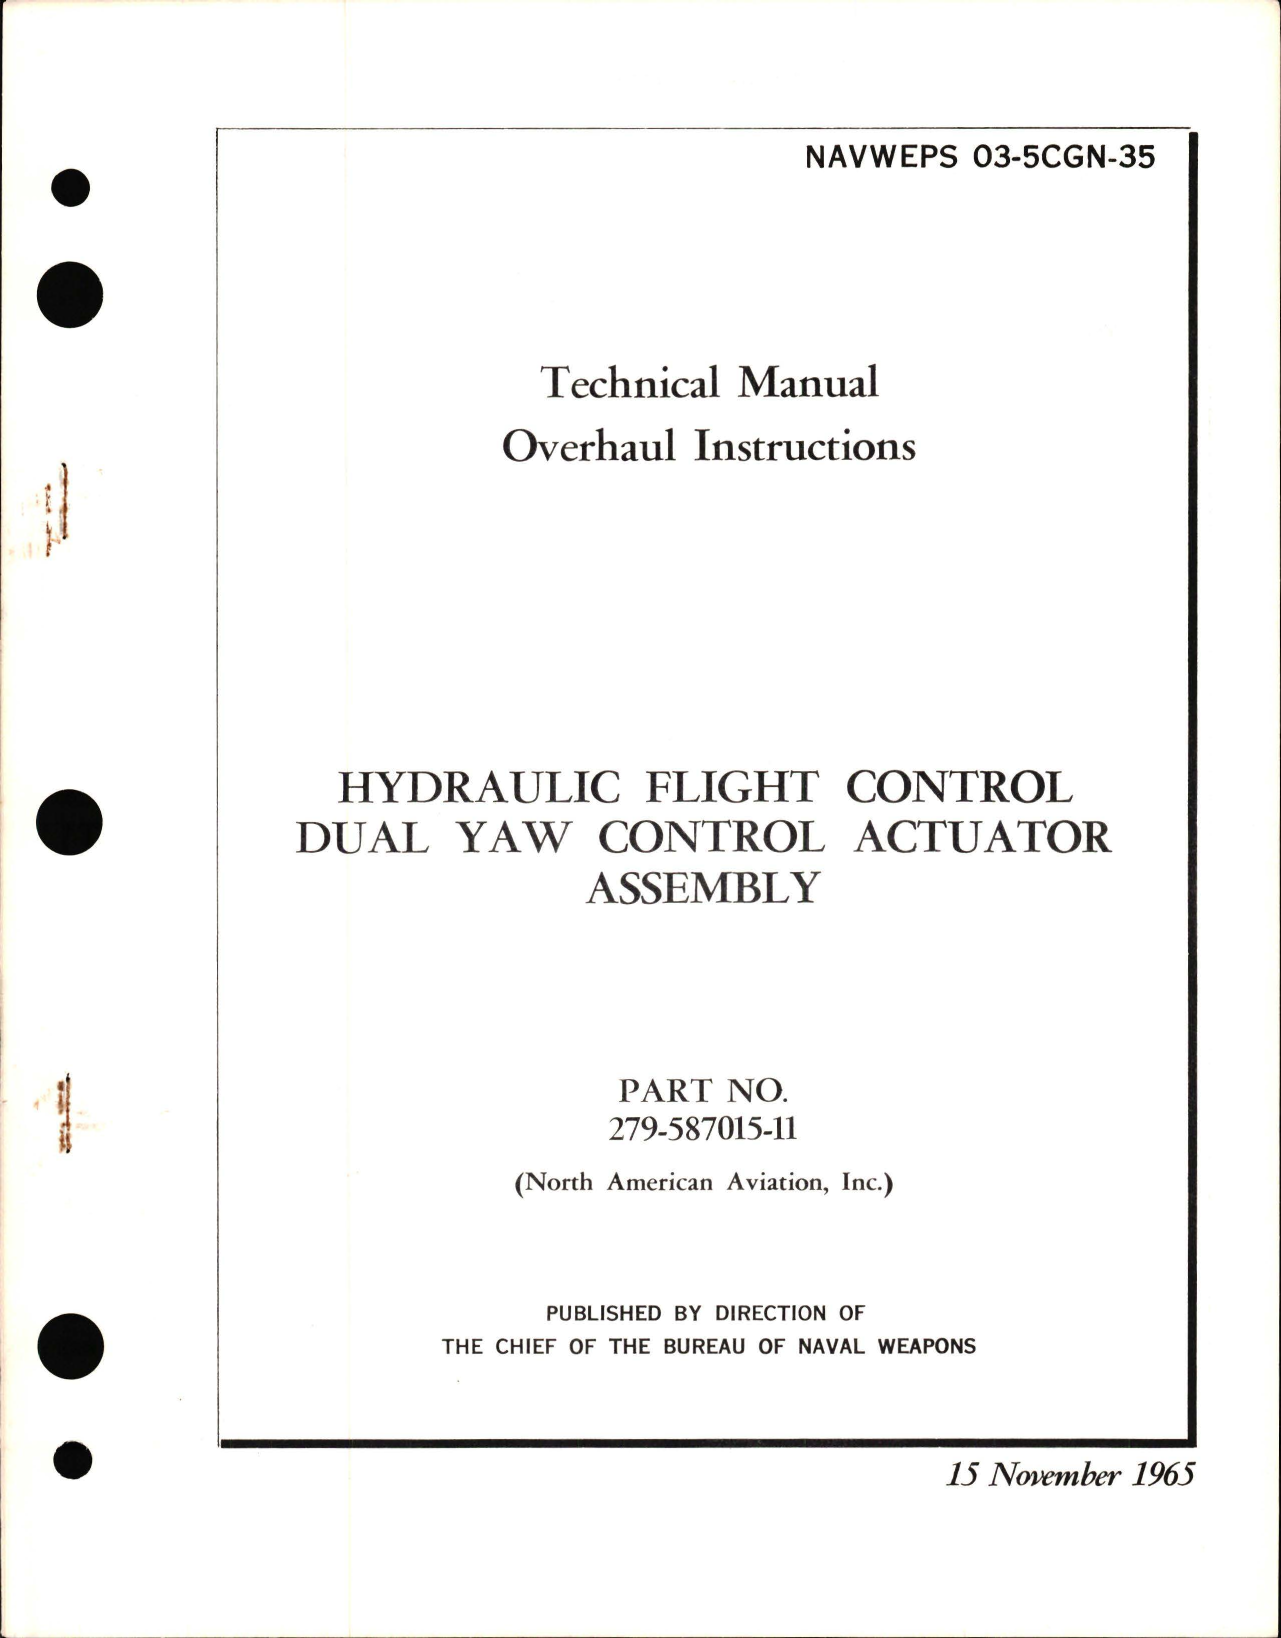 Sample page 1 from AirCorps Library document: Overhaul Instructions for Hydraulic Flight Control, Dual Yaw Control Actuator Assembly - Part 279-587015-11 